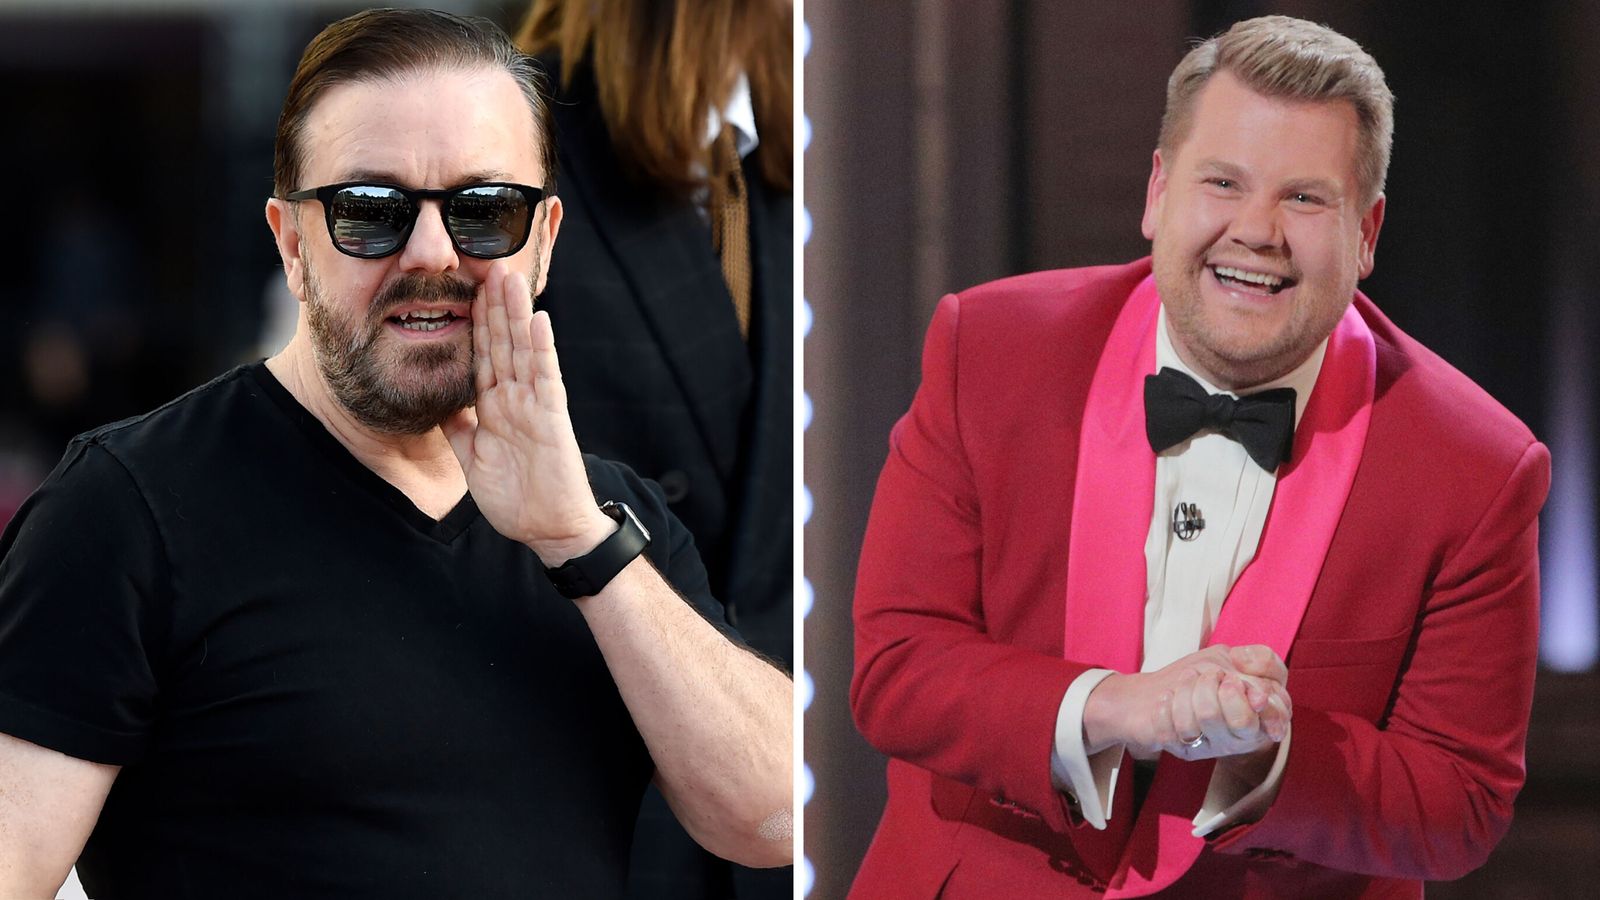 James Corden responds to criticism he copied a Ricky Gervais joke on The Late Late Show